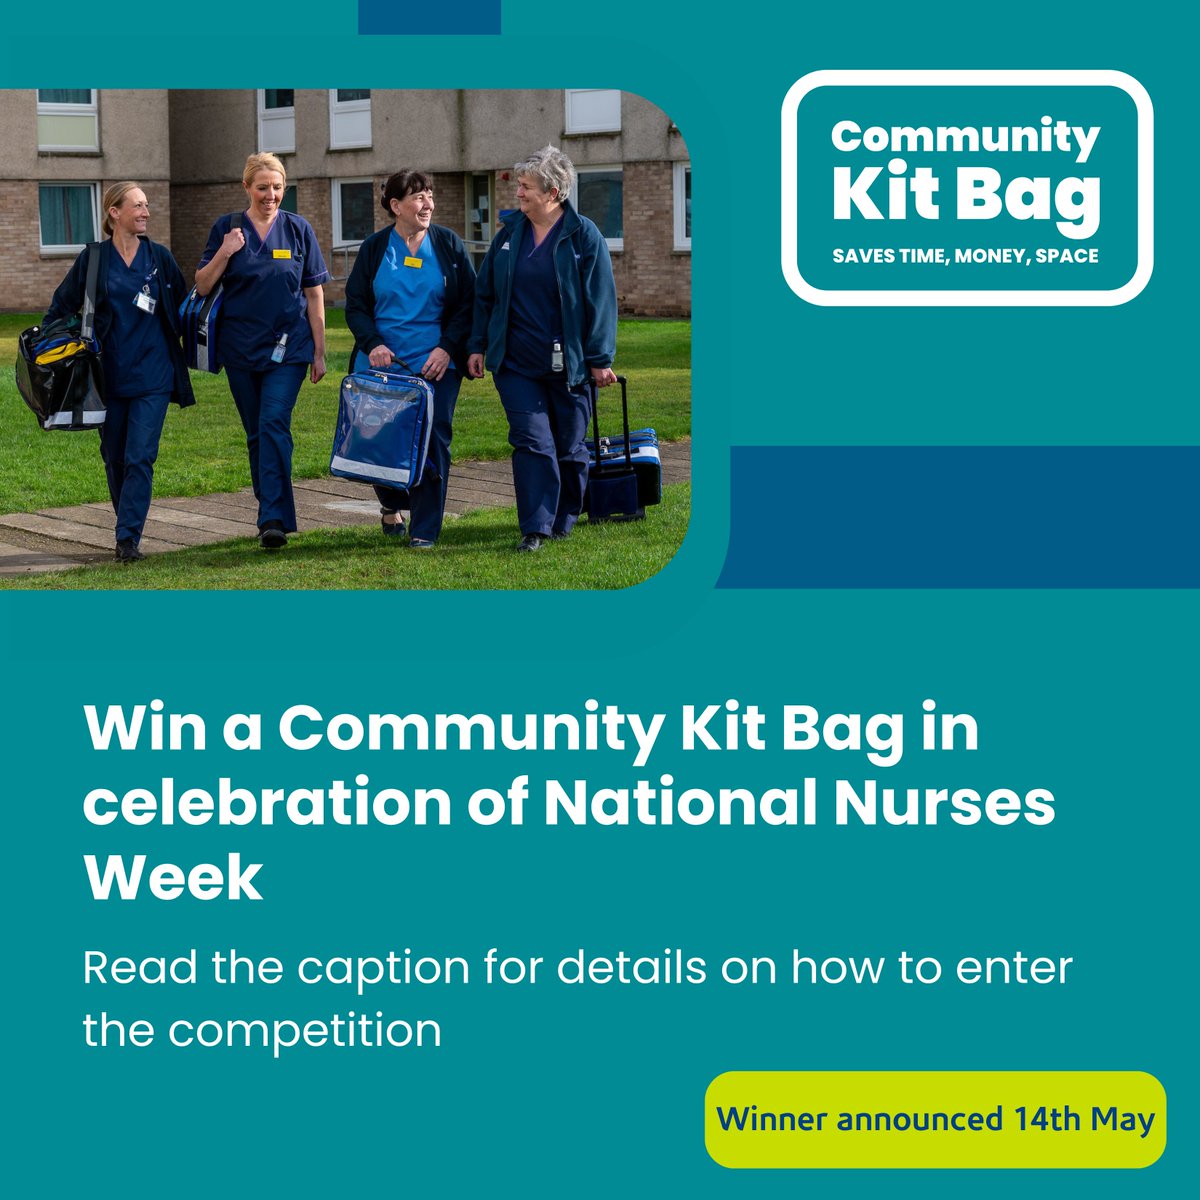 To celebrate #NationalNursesWeek we're giving away a FREE Community Kit Bag system ❗ Retweet and like this tweet to enter (make sure you are also following us). We'll announce the winner on 14th May - good luck! #ThisBagGivesBack